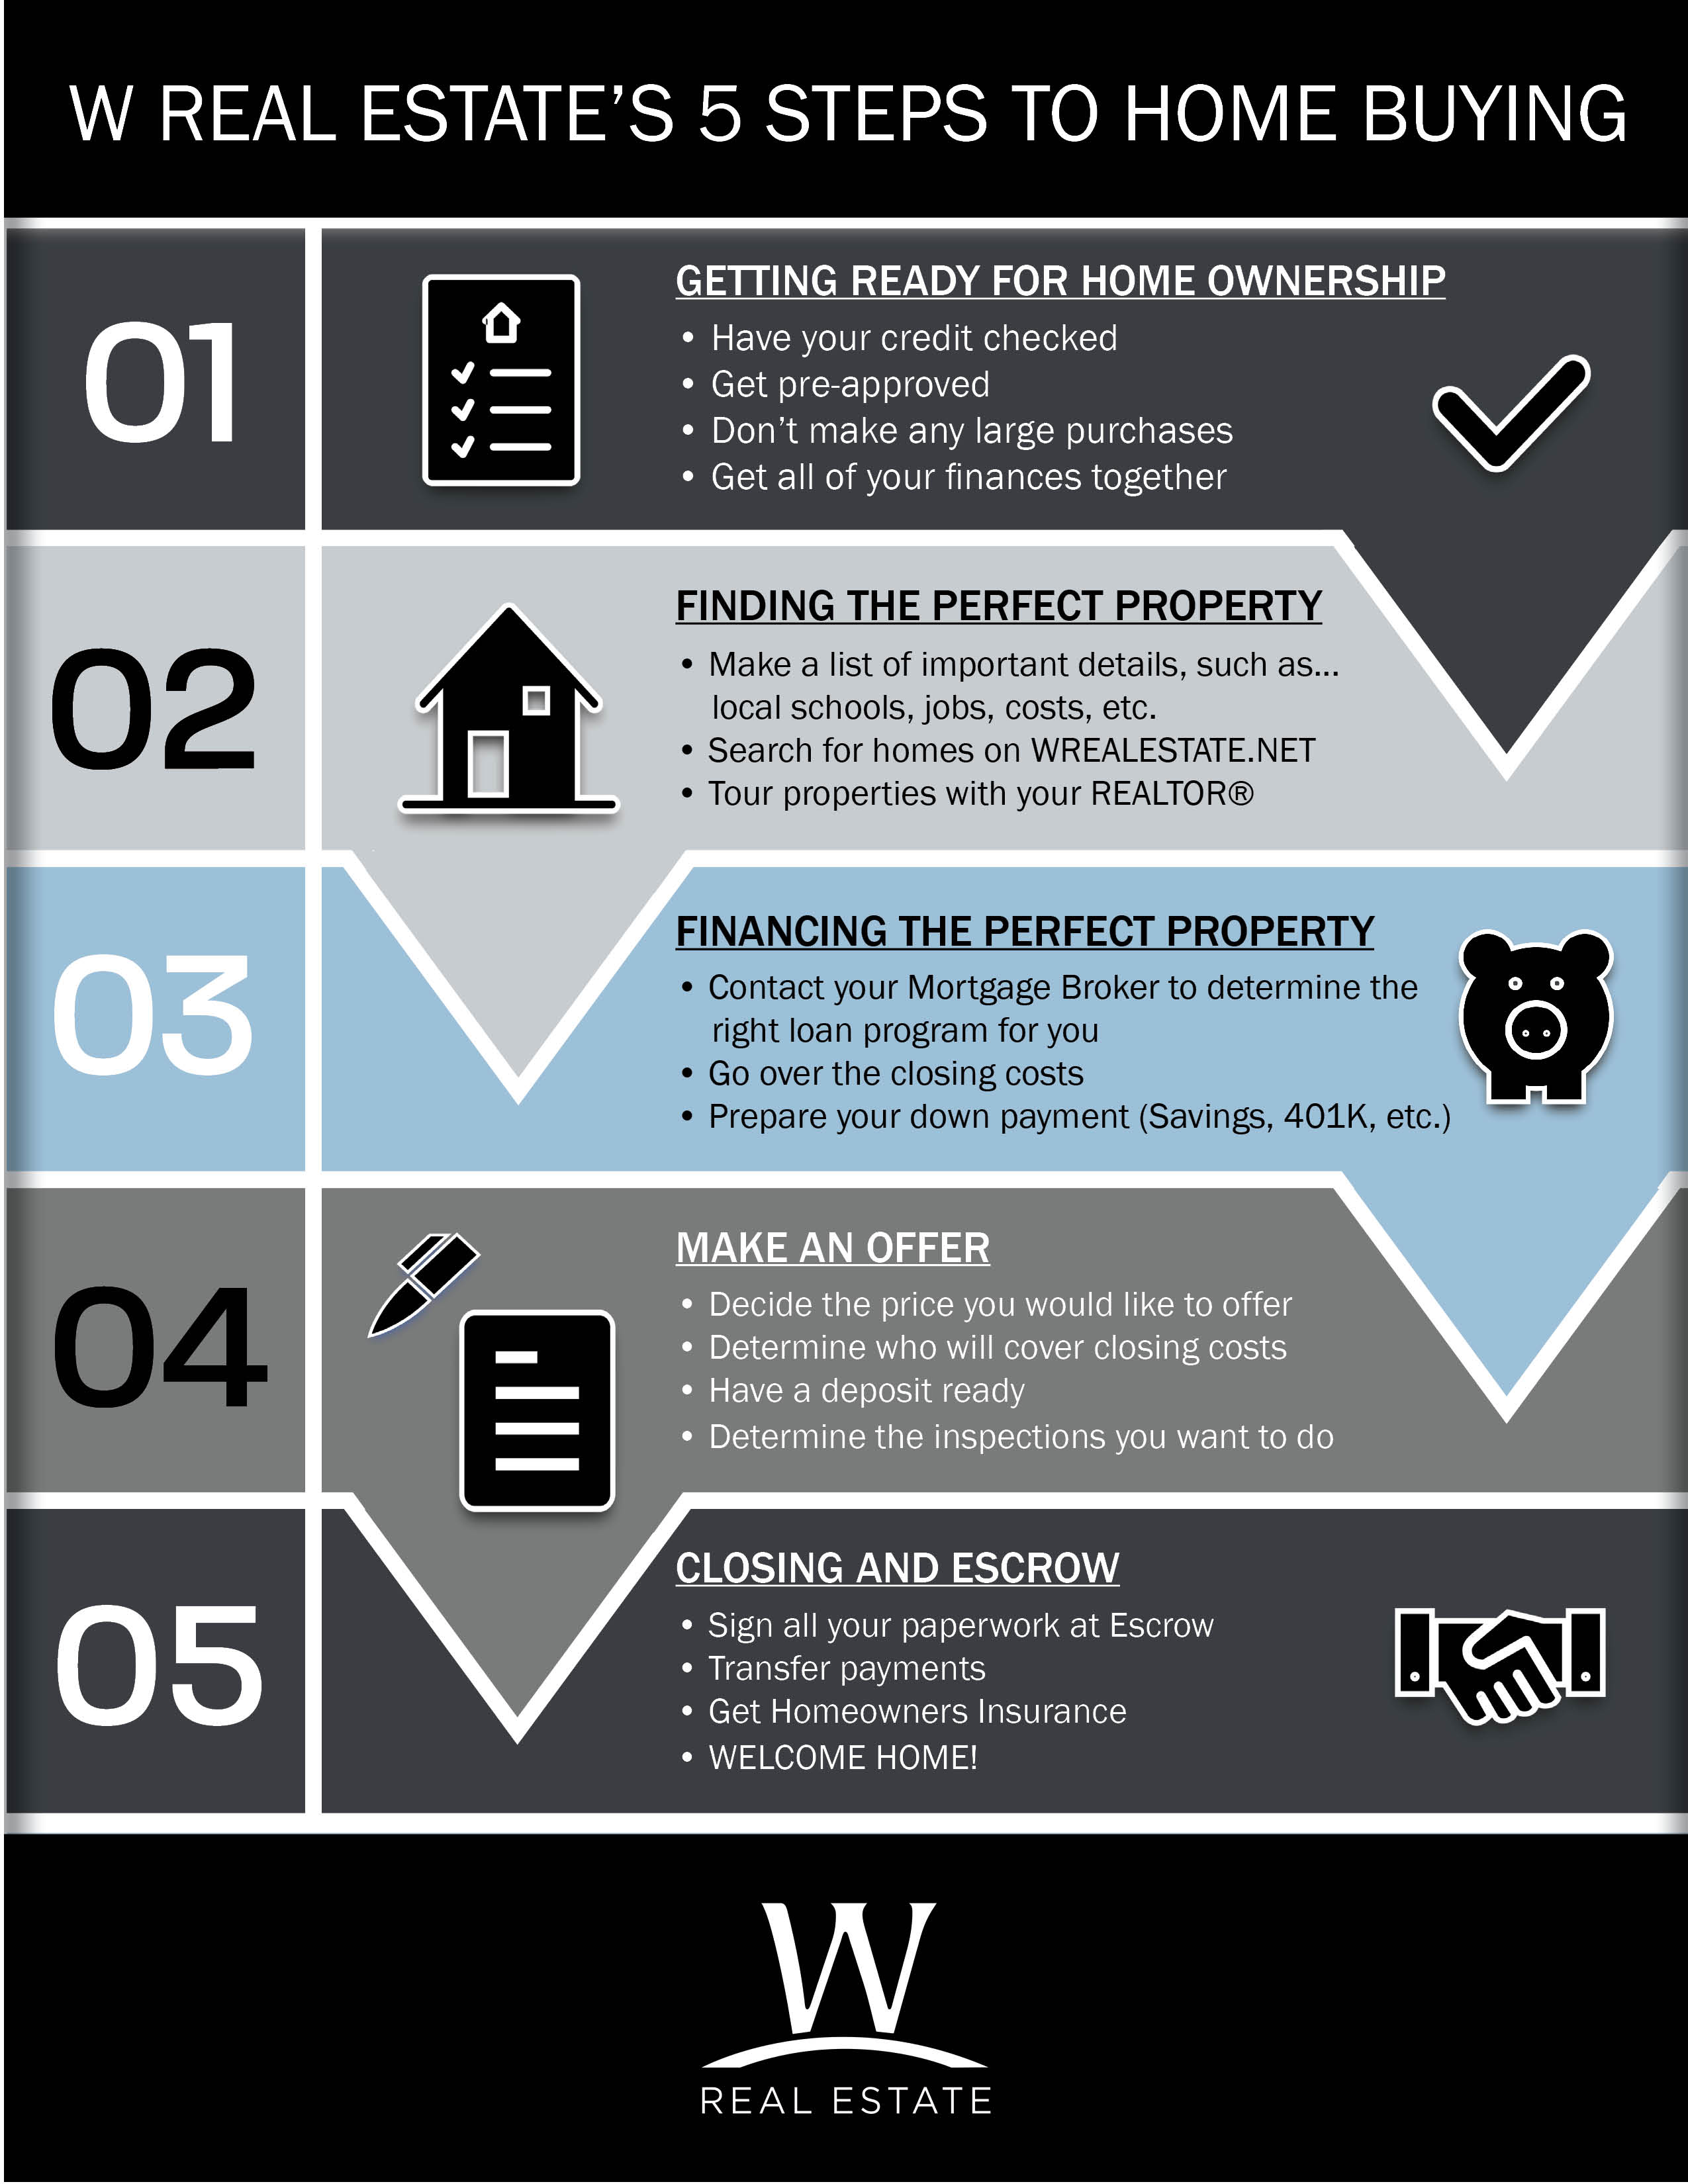 Image of W Real Estate's Five Steps to Home Buying